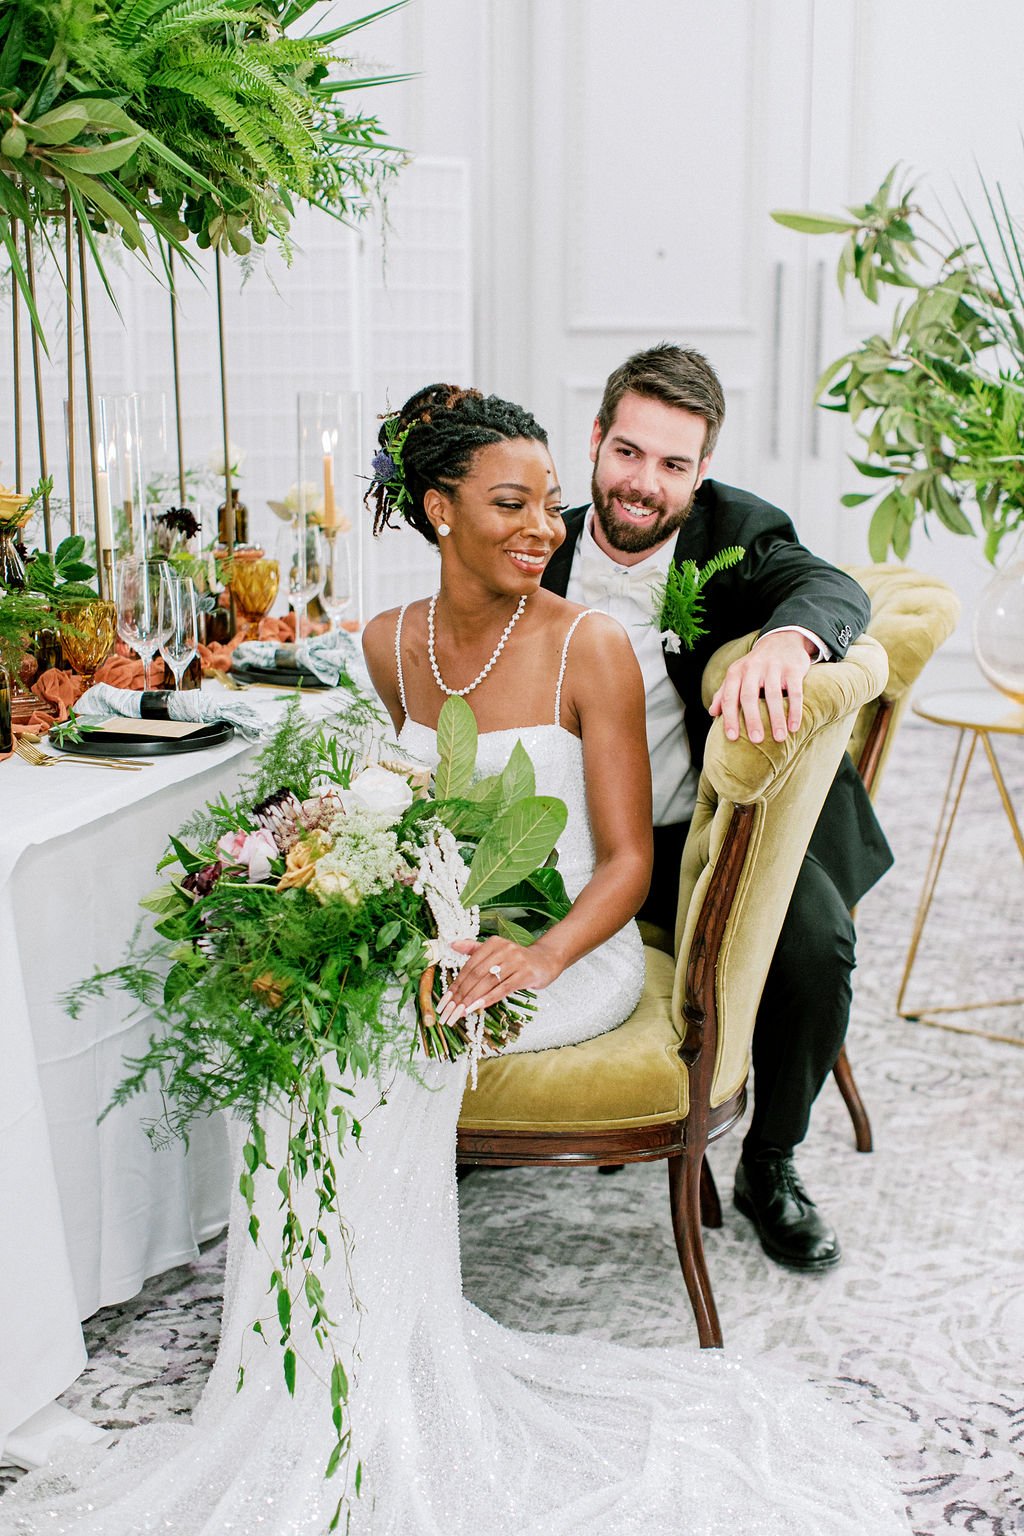 5-things-to-know-before-booking-your-wedding-florist-brought-to-you-by-savannah-wedding-planner-and-savannah-florist-ivory-and-beau-savannah-plant-riverside-district-savannah-wedding-savannah-bridal-shop-maggie-sottero-made-wiith-love-bridal-39.jpg